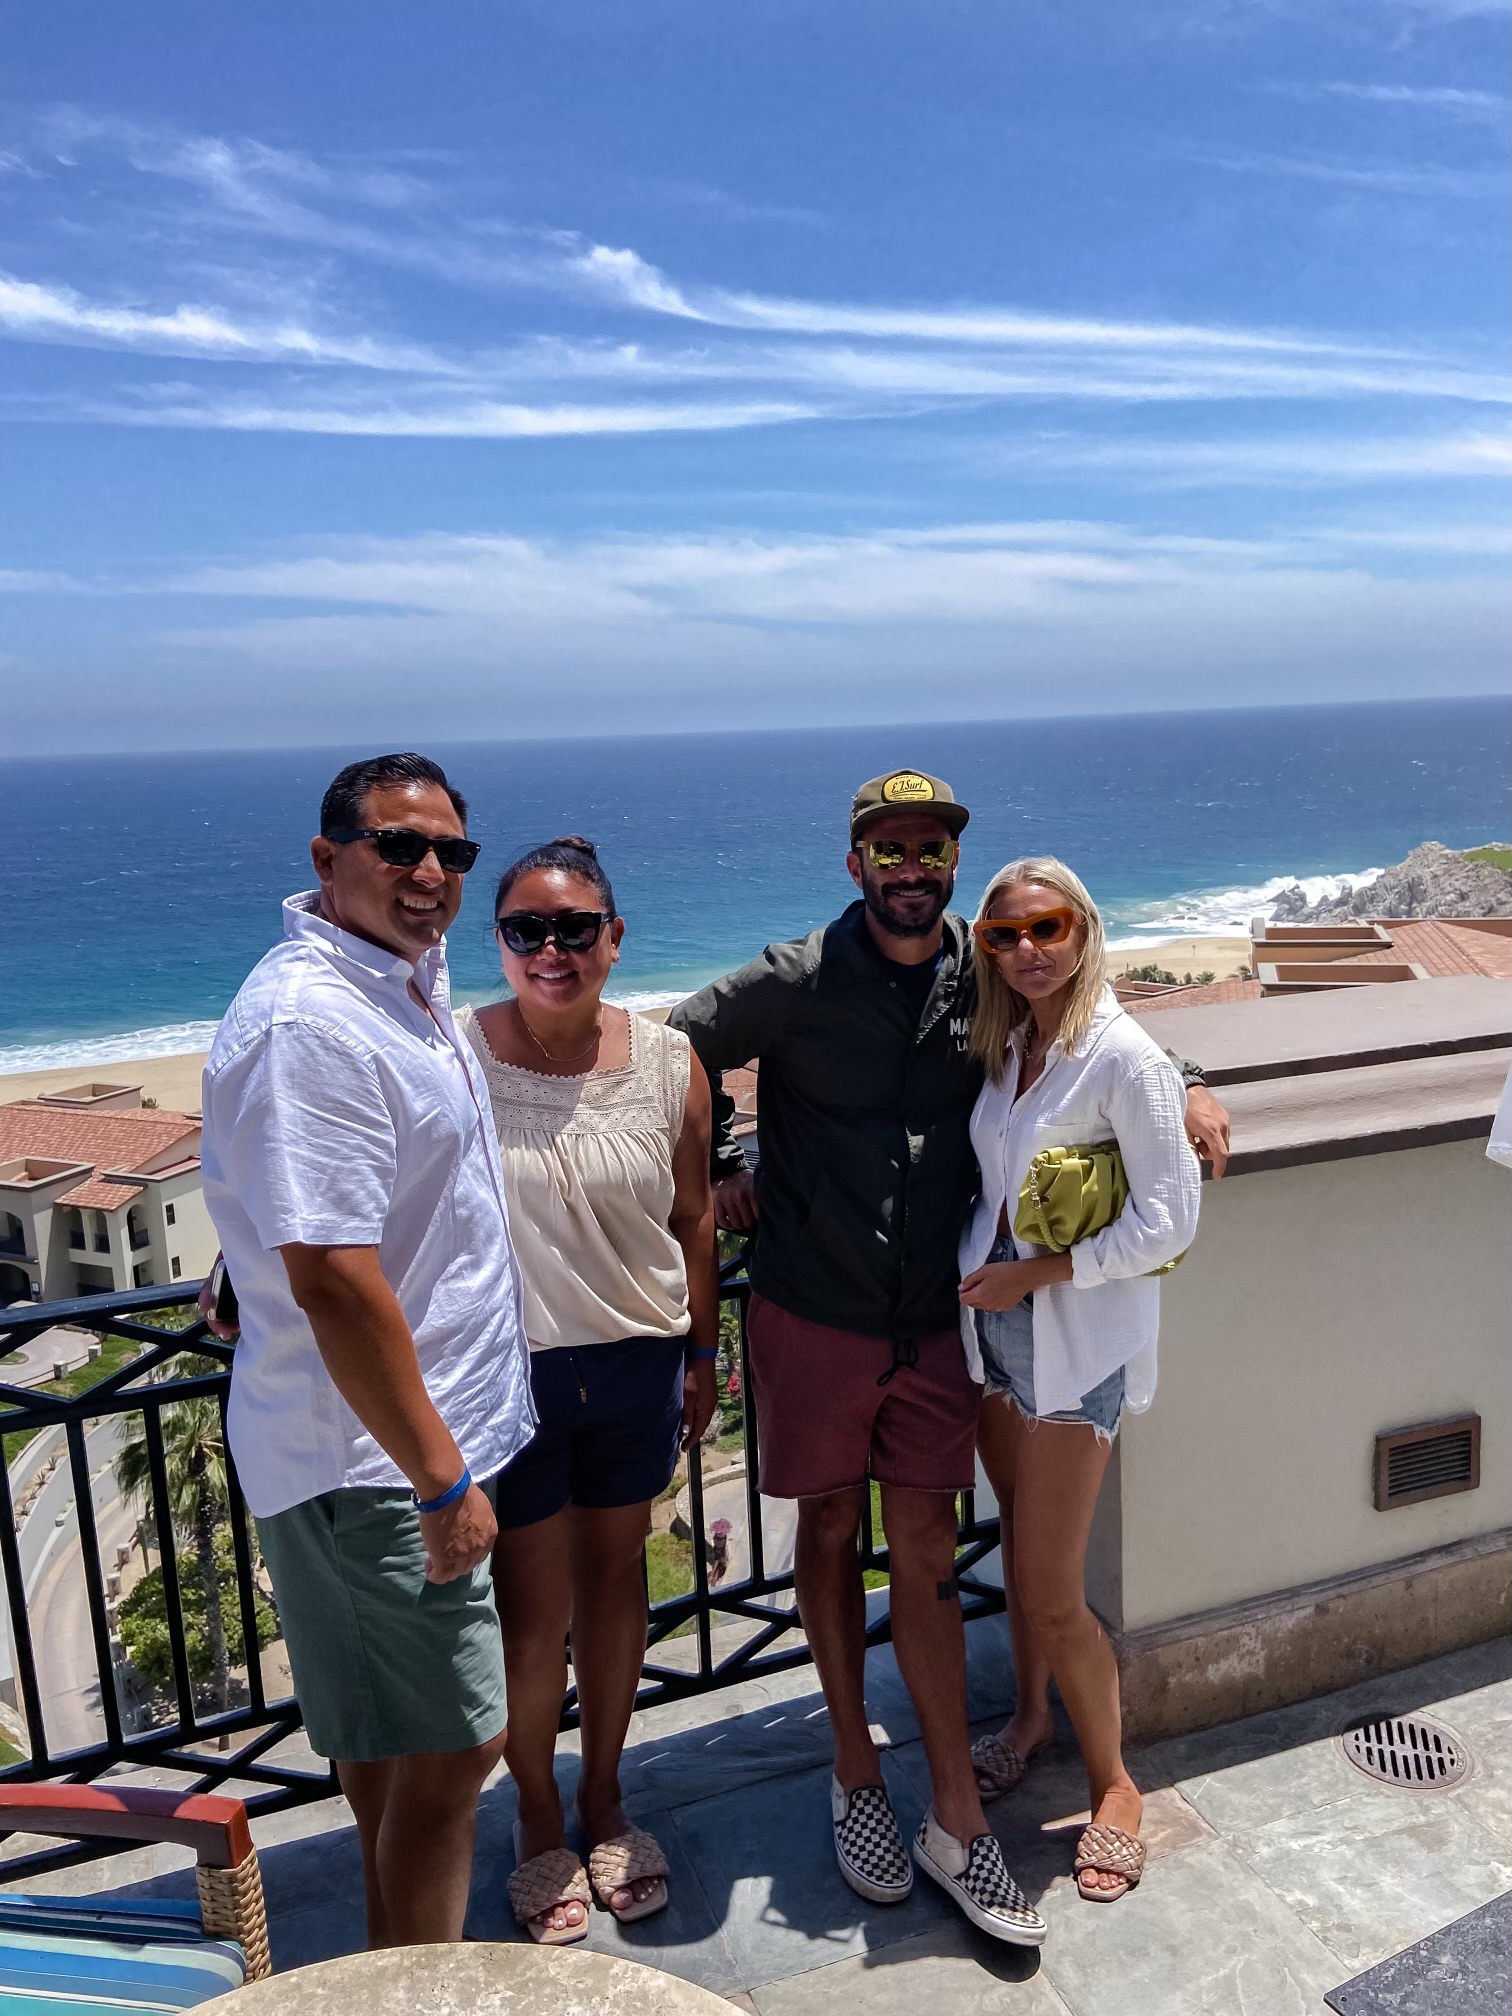 Cabo Trip-Jaclyn De Leon Style. Cabo trip details. Stayed at the Pueblo Bonito for 5 nights. Amazing all-inclusive restaurants and swimming pools + activites.